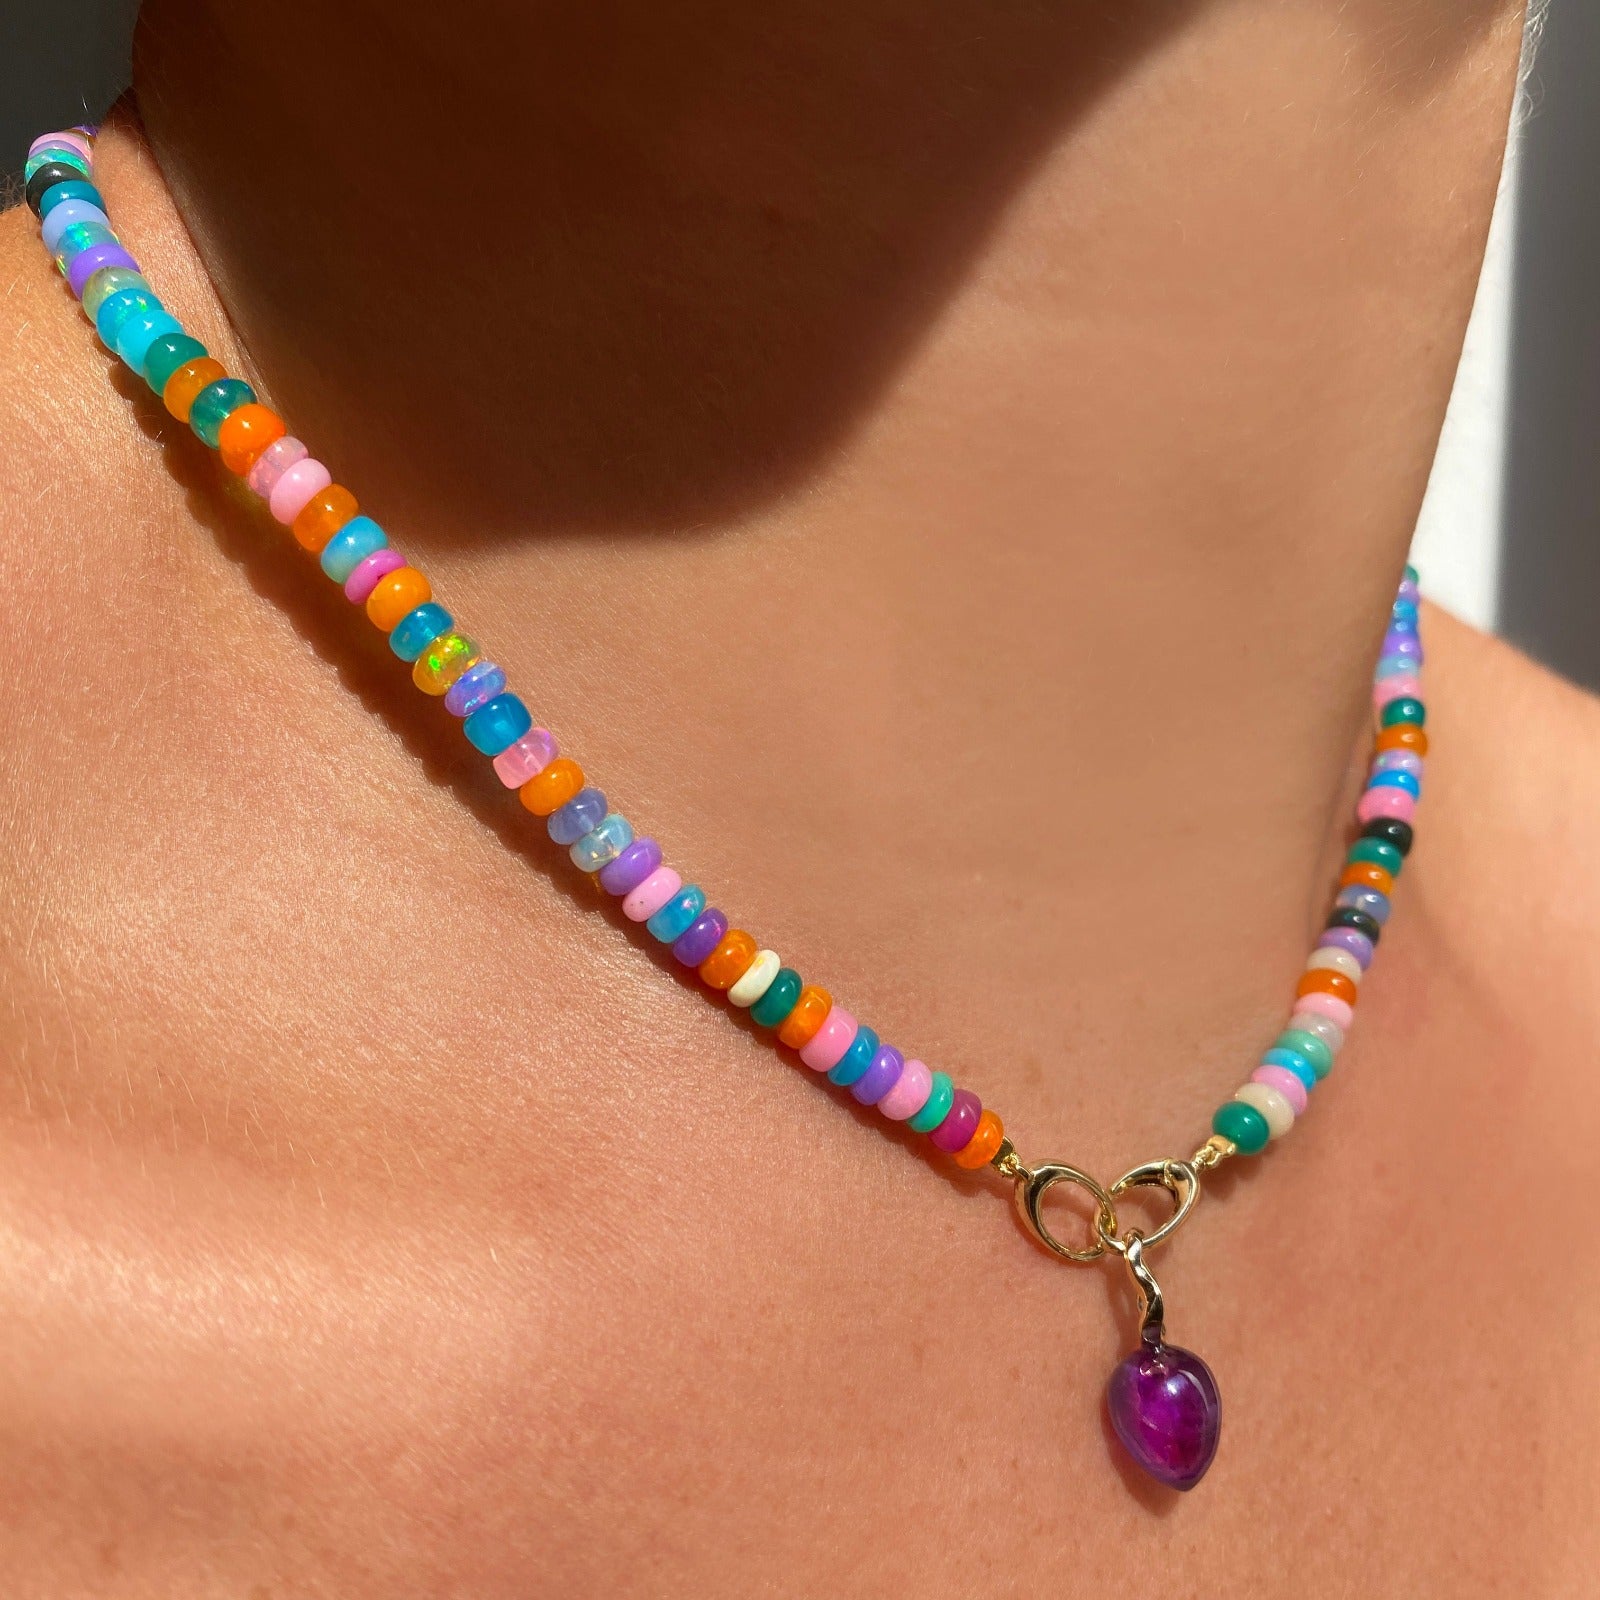 Shimmering beaded necklace made of smooth opal rondels in shades of fiery blues, hot pink, teal, and orange on a slim gold oval clasp. Styled on a neck layered with an acorn drop charm.